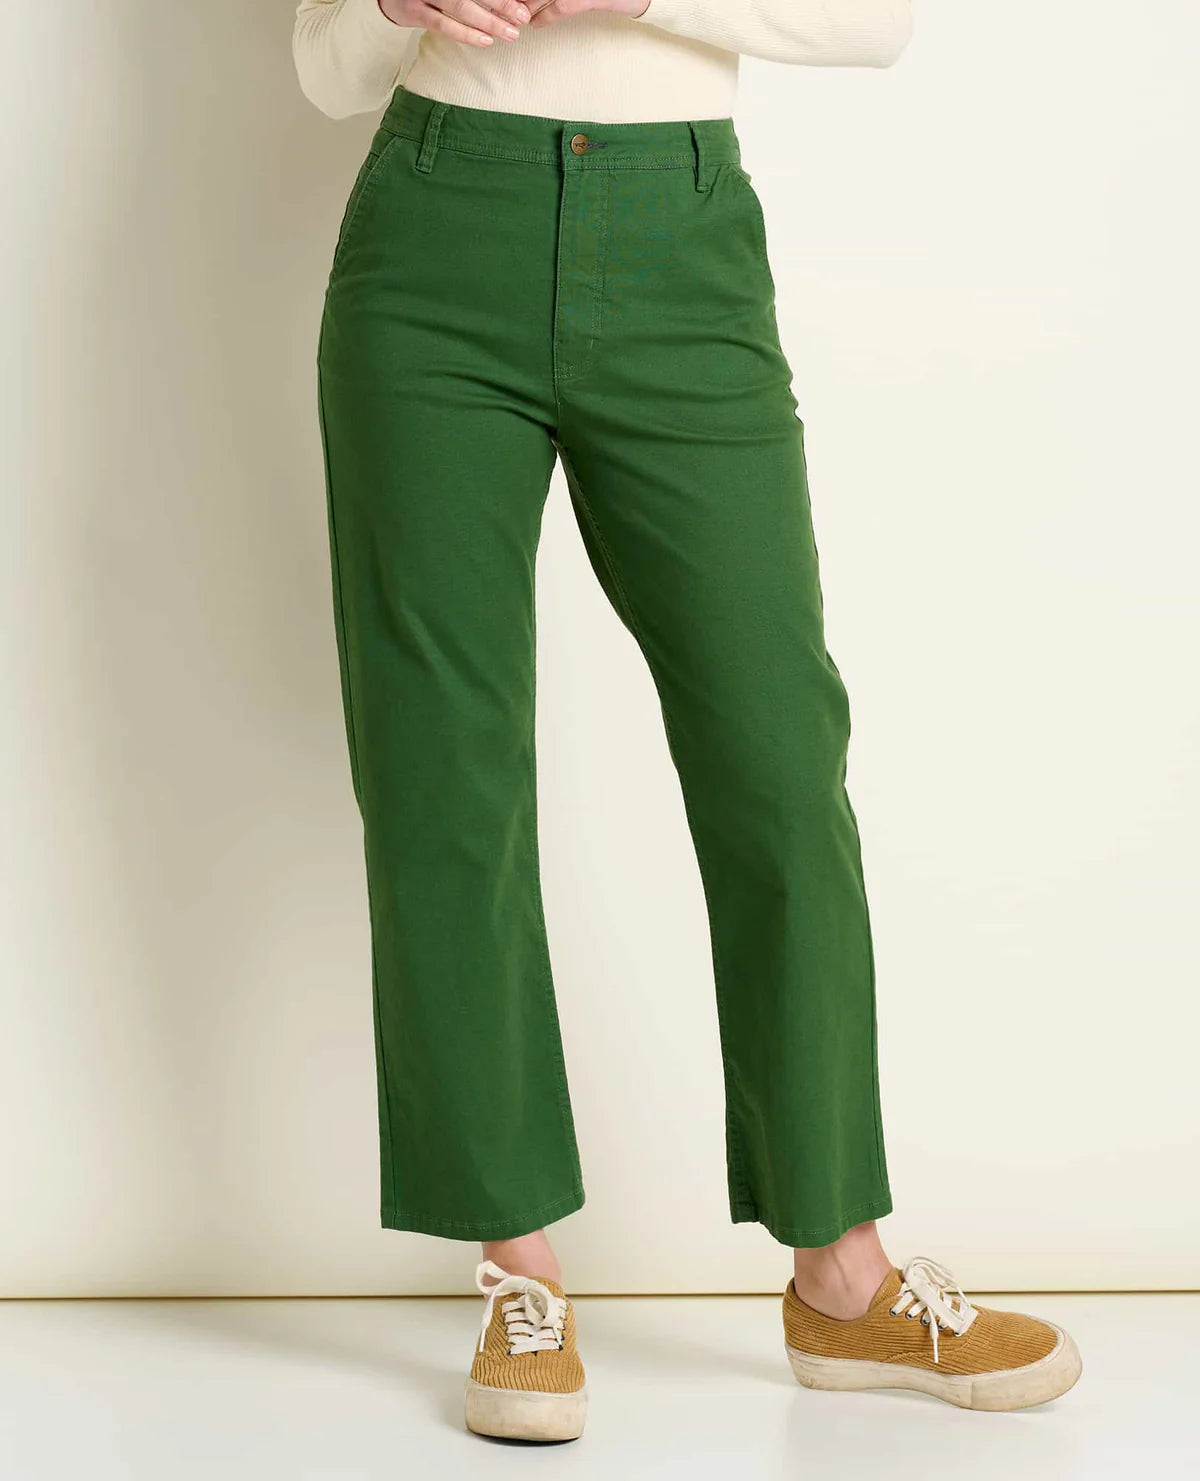 Toad & Co Earthworks High Rise Pant - Pasture